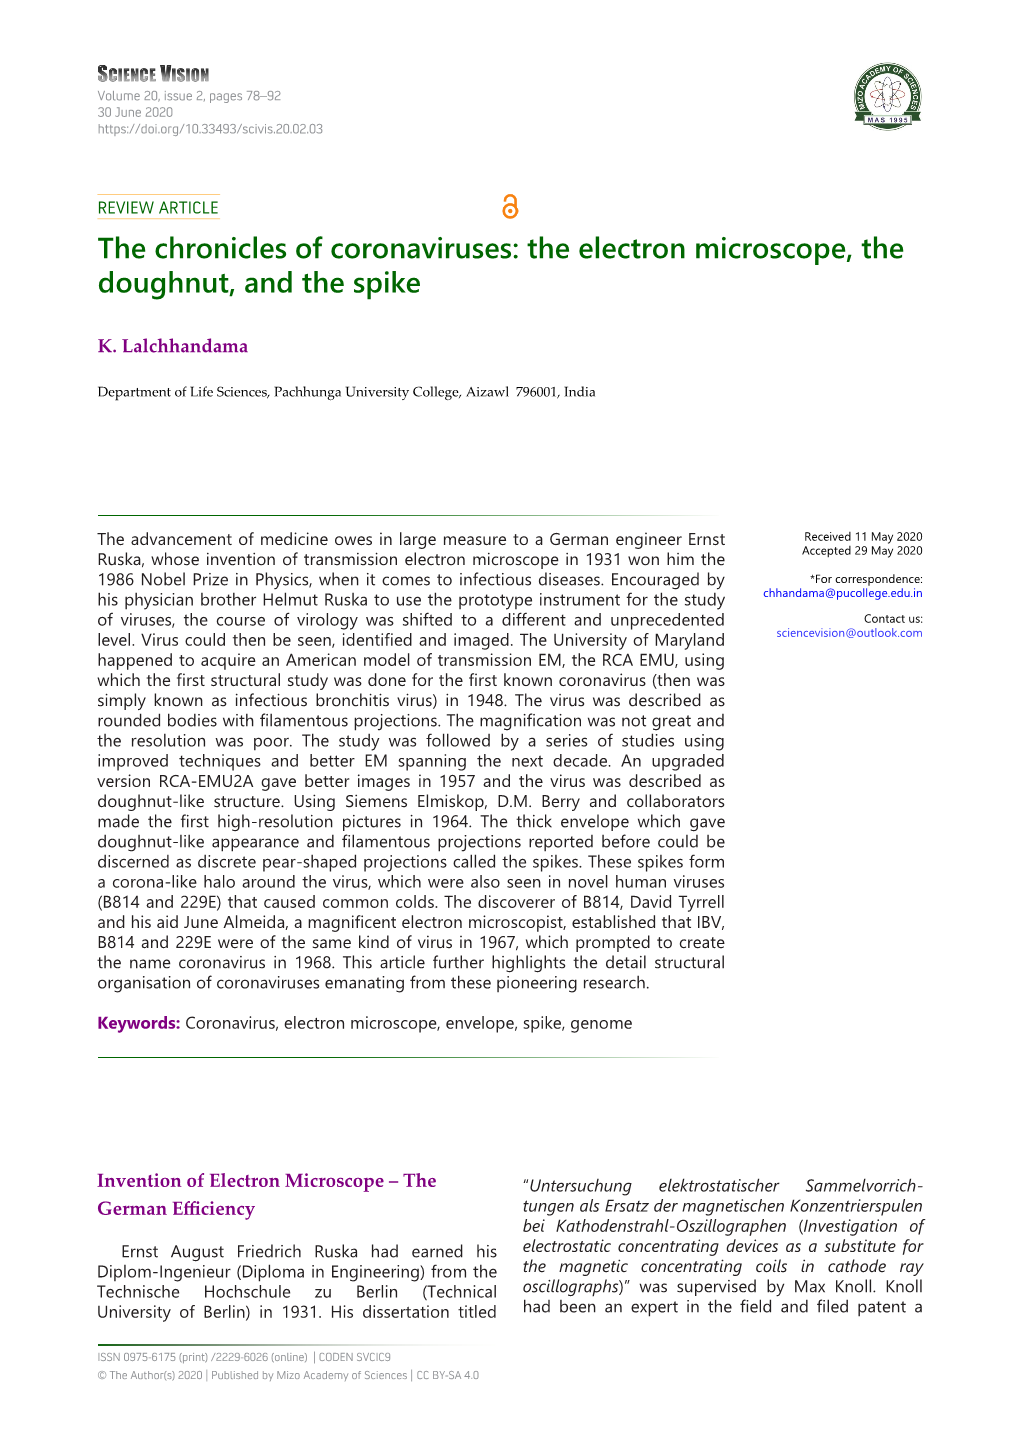 The Chronicles of Coronaviruses: the Electron Microscope, the Doughnut, and the Spike